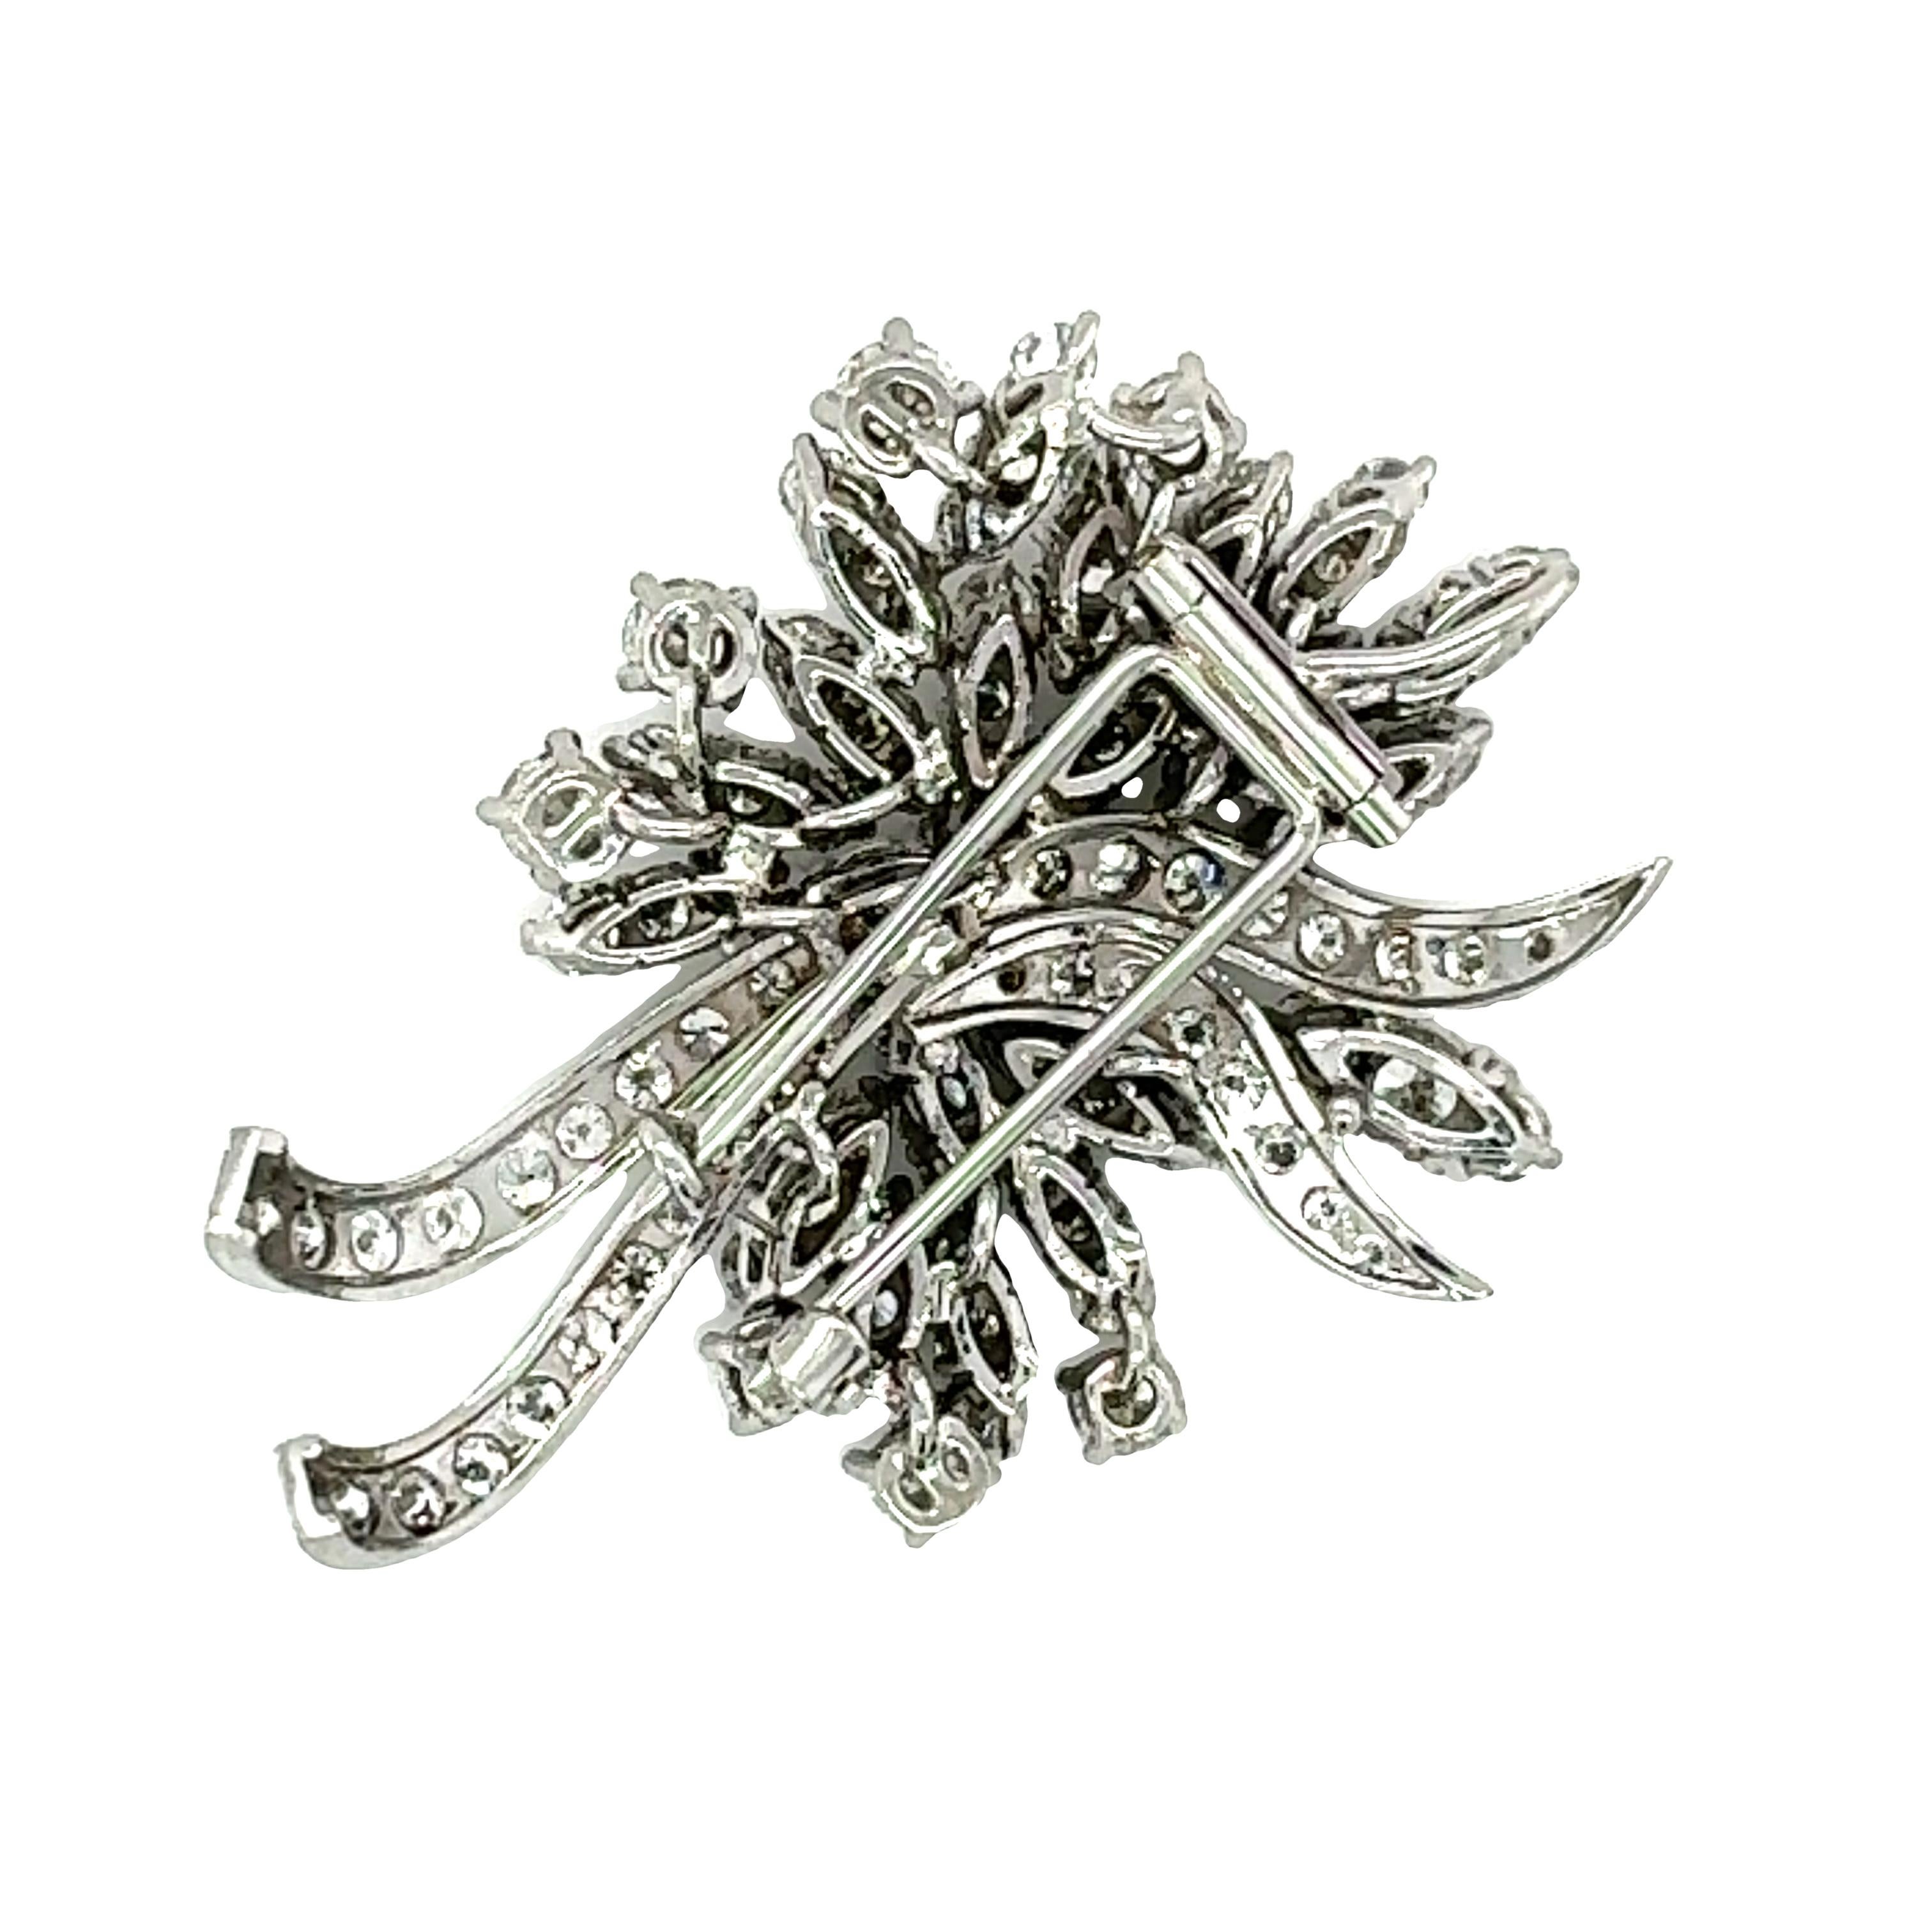 One mid-century diamond floral motif brooch in 14K white gold featuring 106 round brilliant cut diamonds totaling 10.33 ct. with F-G color and VS-1 clarity.

Metal: 14K White Gold
Gemstone: Diamonds totaling 10.33 ct., F-G / VS-1
Circa: